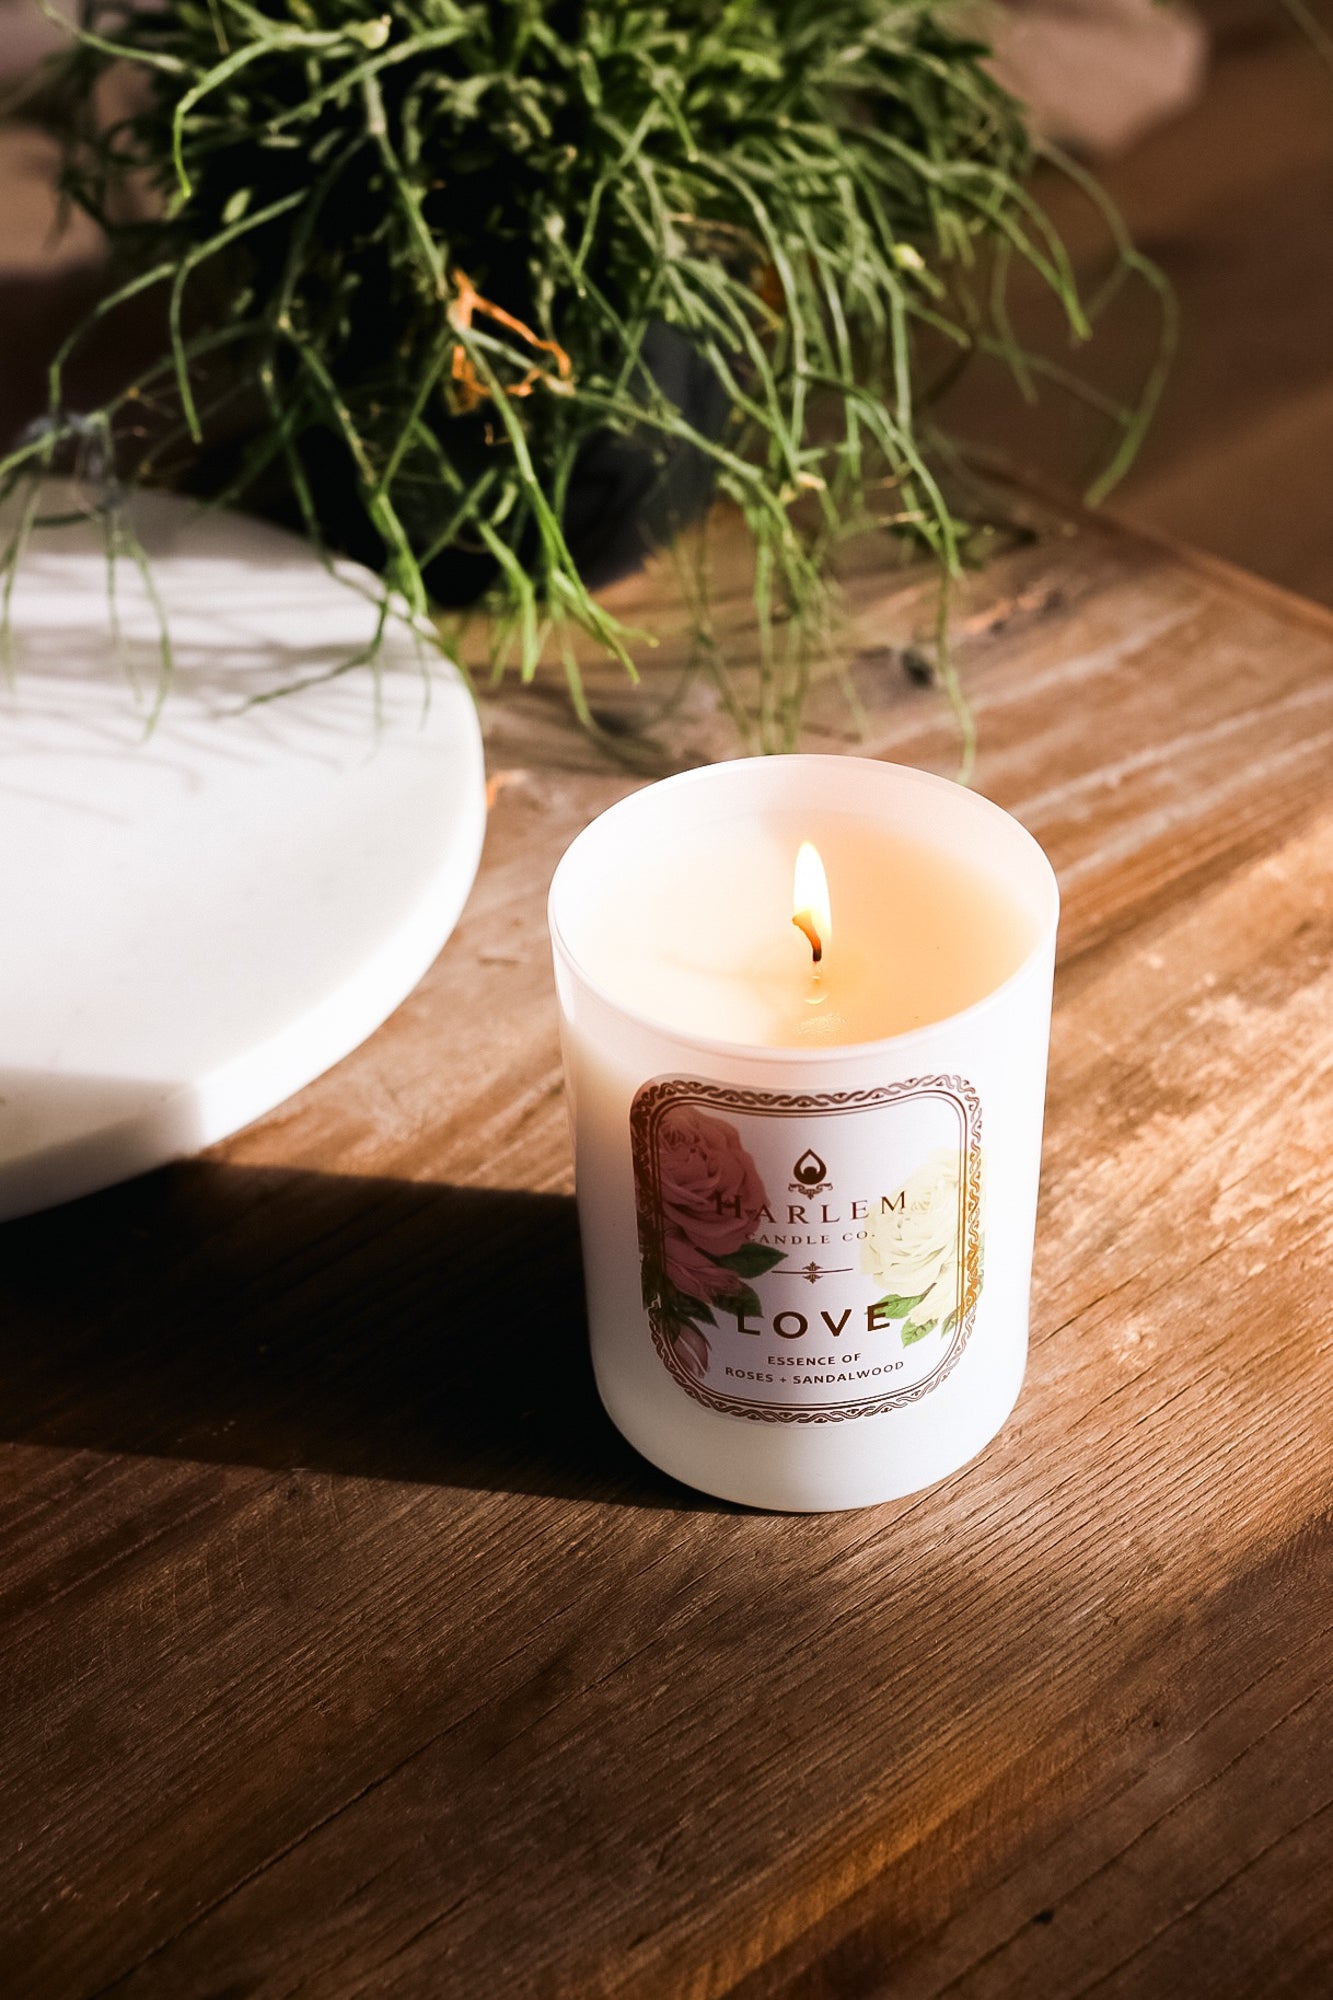 This is an image of the "Love" Luxury Candle on a wooden table with greenery in the background.